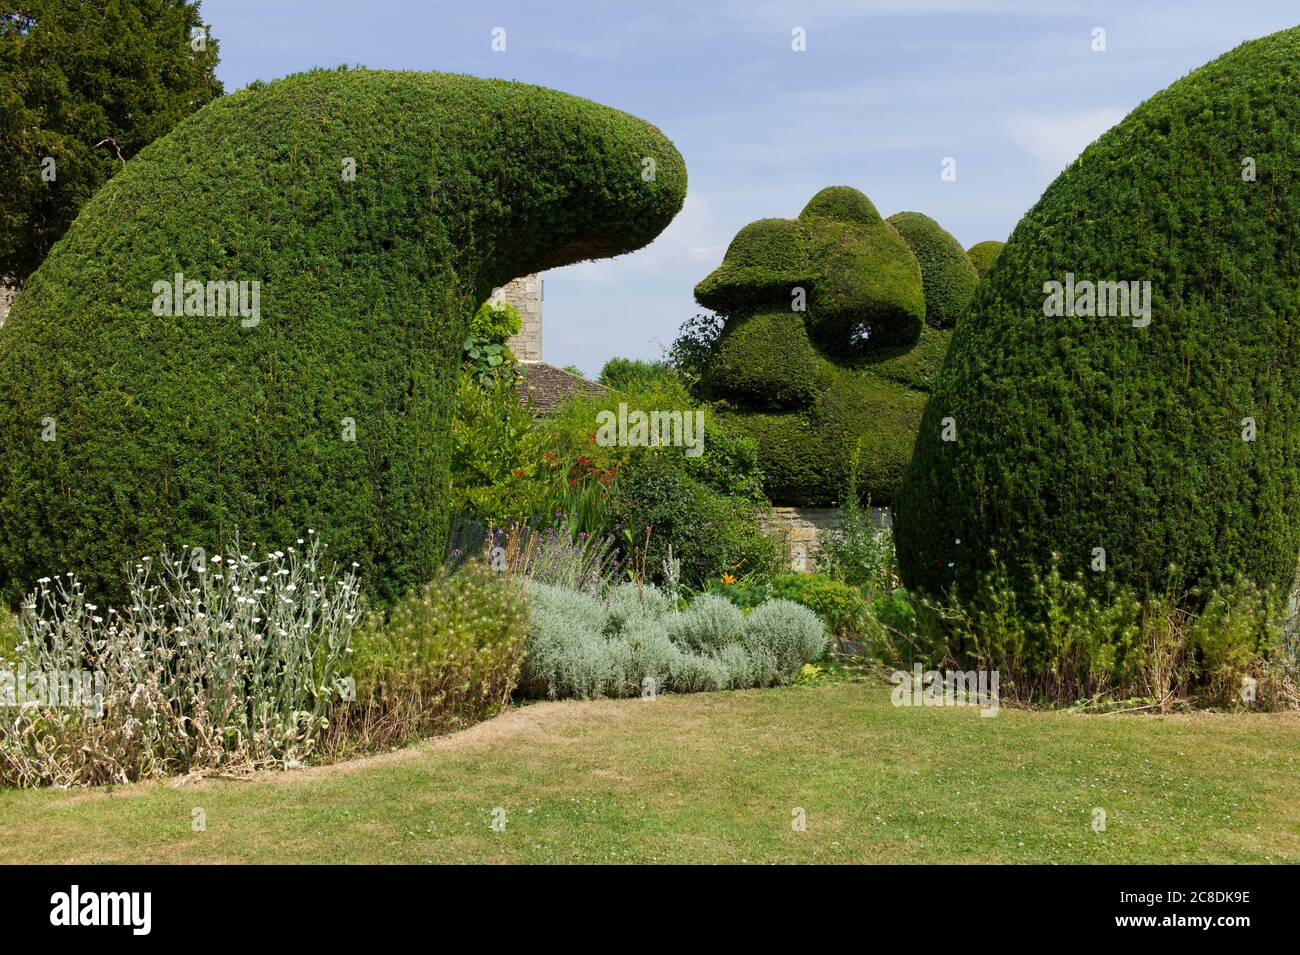 Unusual yew topiary dominates a border separating the main lawn from the house at The Courts garden Wiltshire England UK Stock Photo